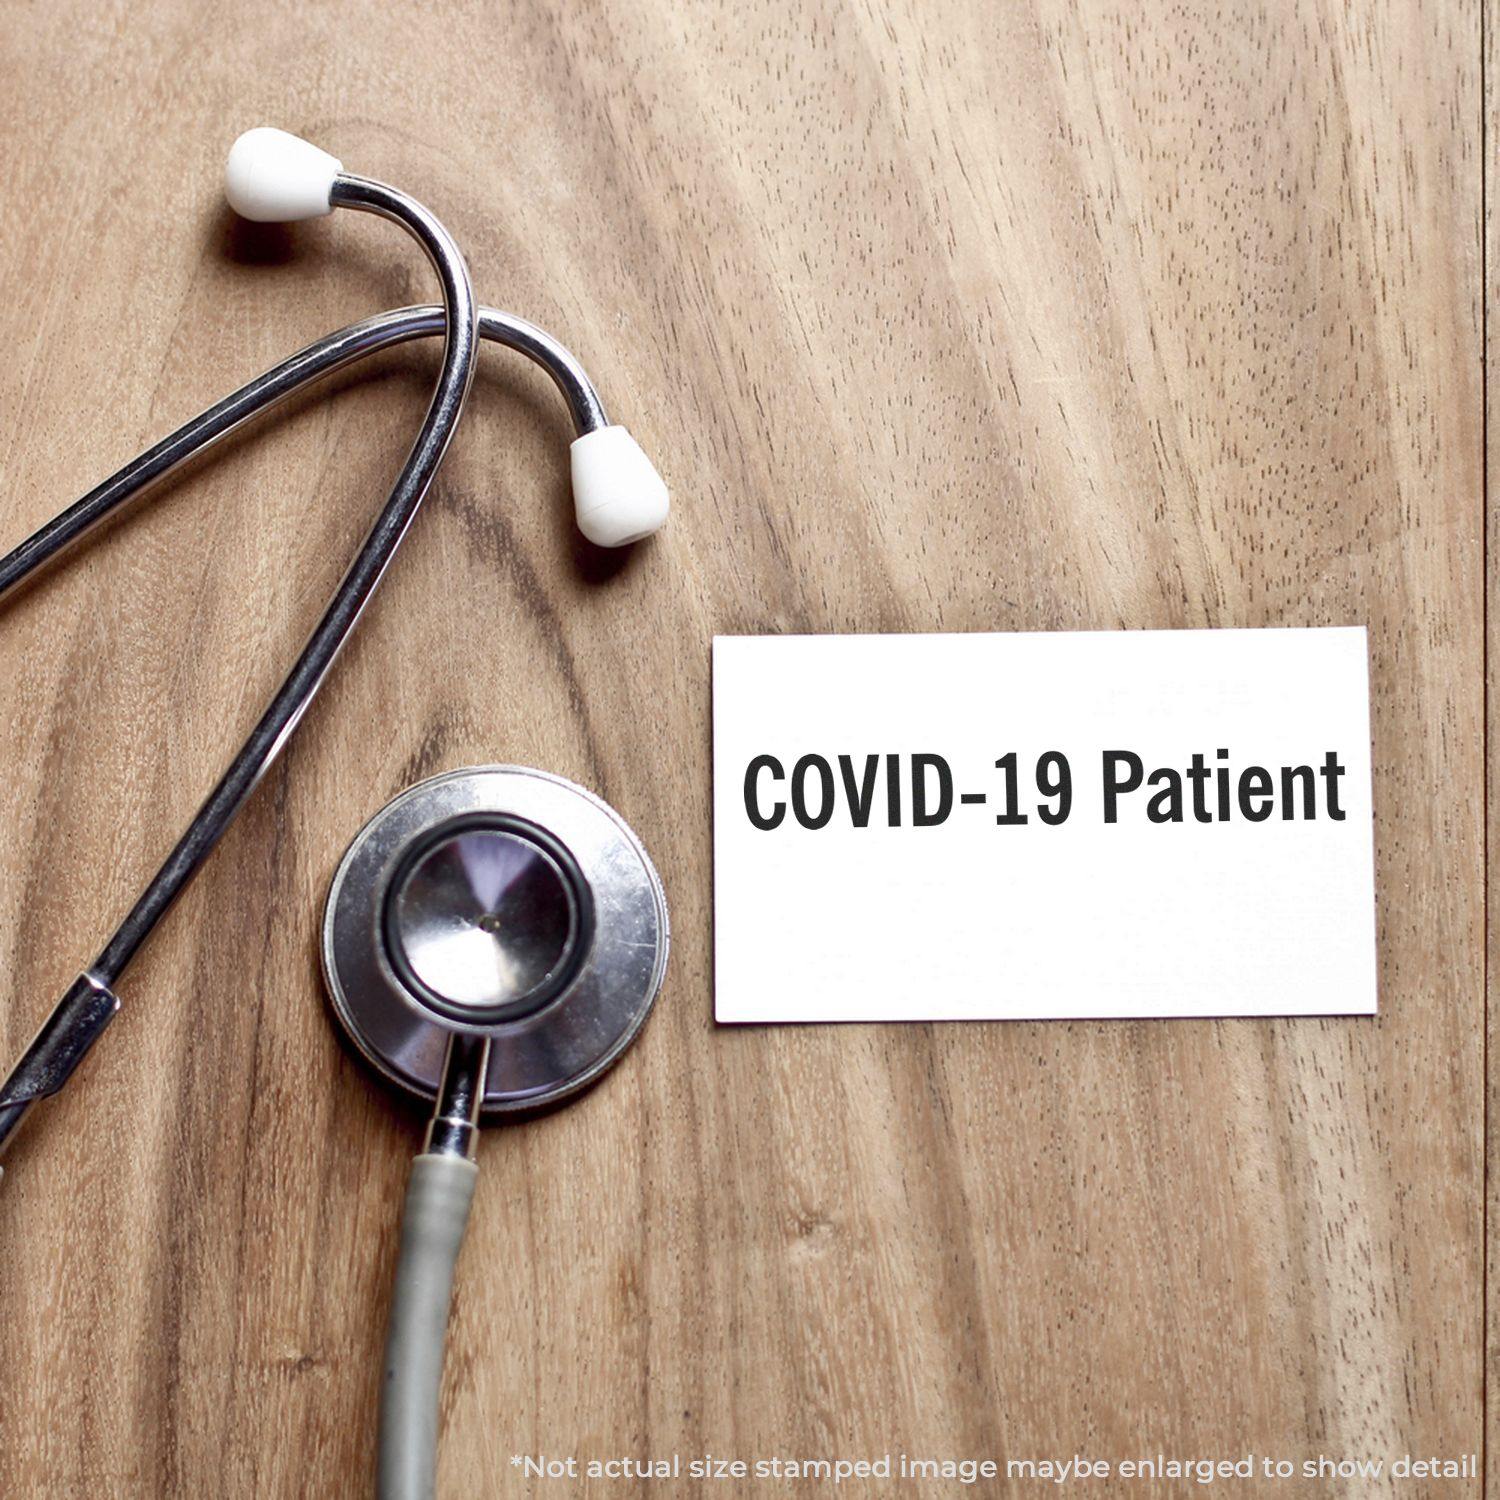 A self-inking stamp with a stamped image showing how the text "COVID-19 Patient" is displayed after stamping.